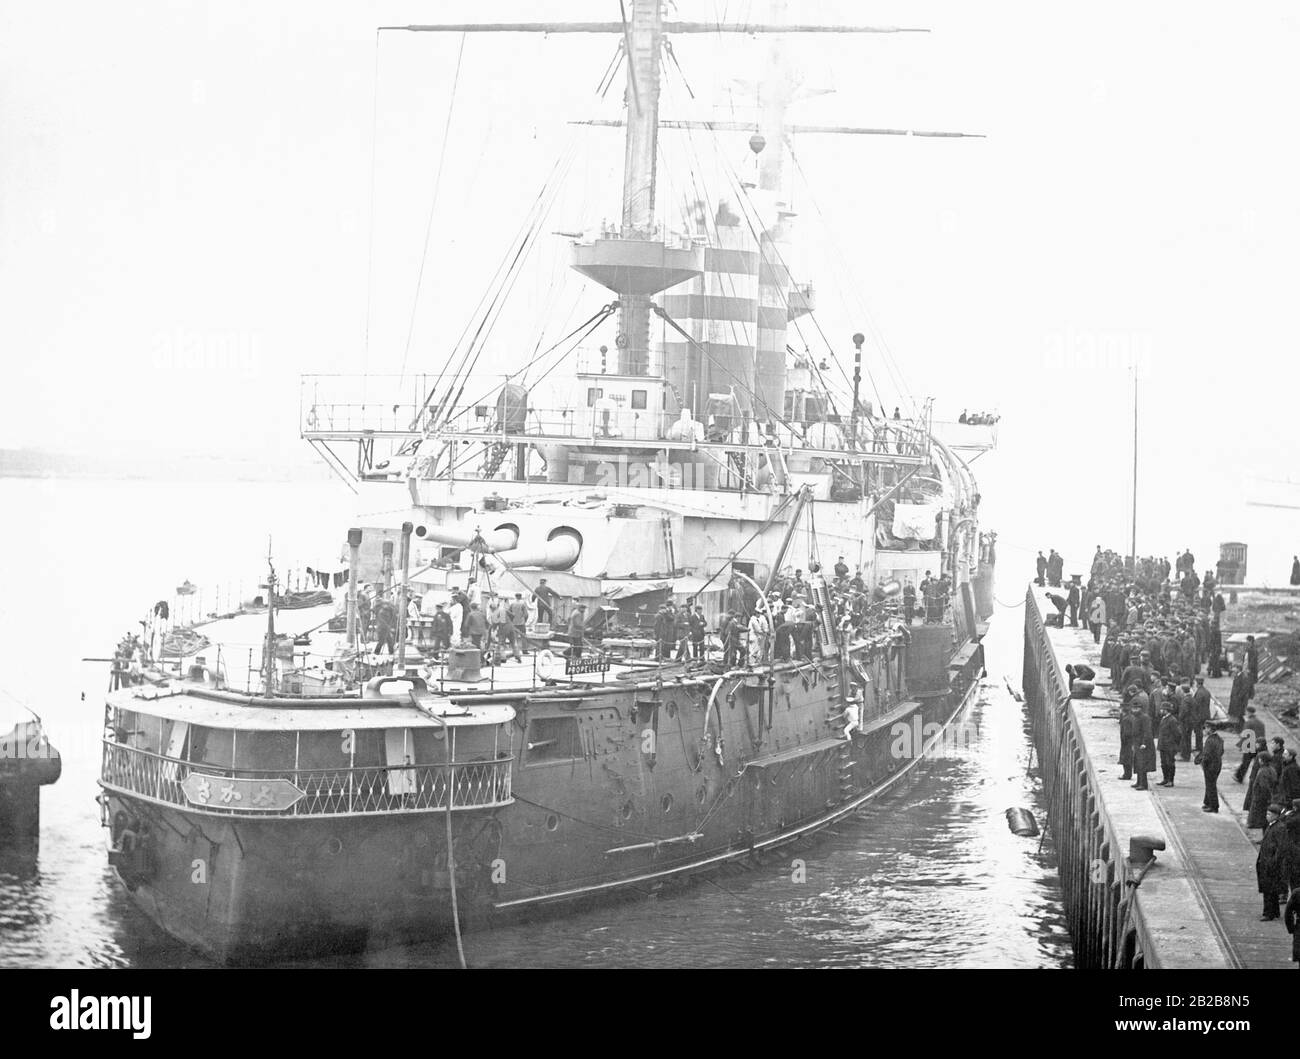 The armored cruiser Mikasa of the Imperial Japanese Army sets sail from a quay. (Undated photograph, c. 1900) Stock Photo